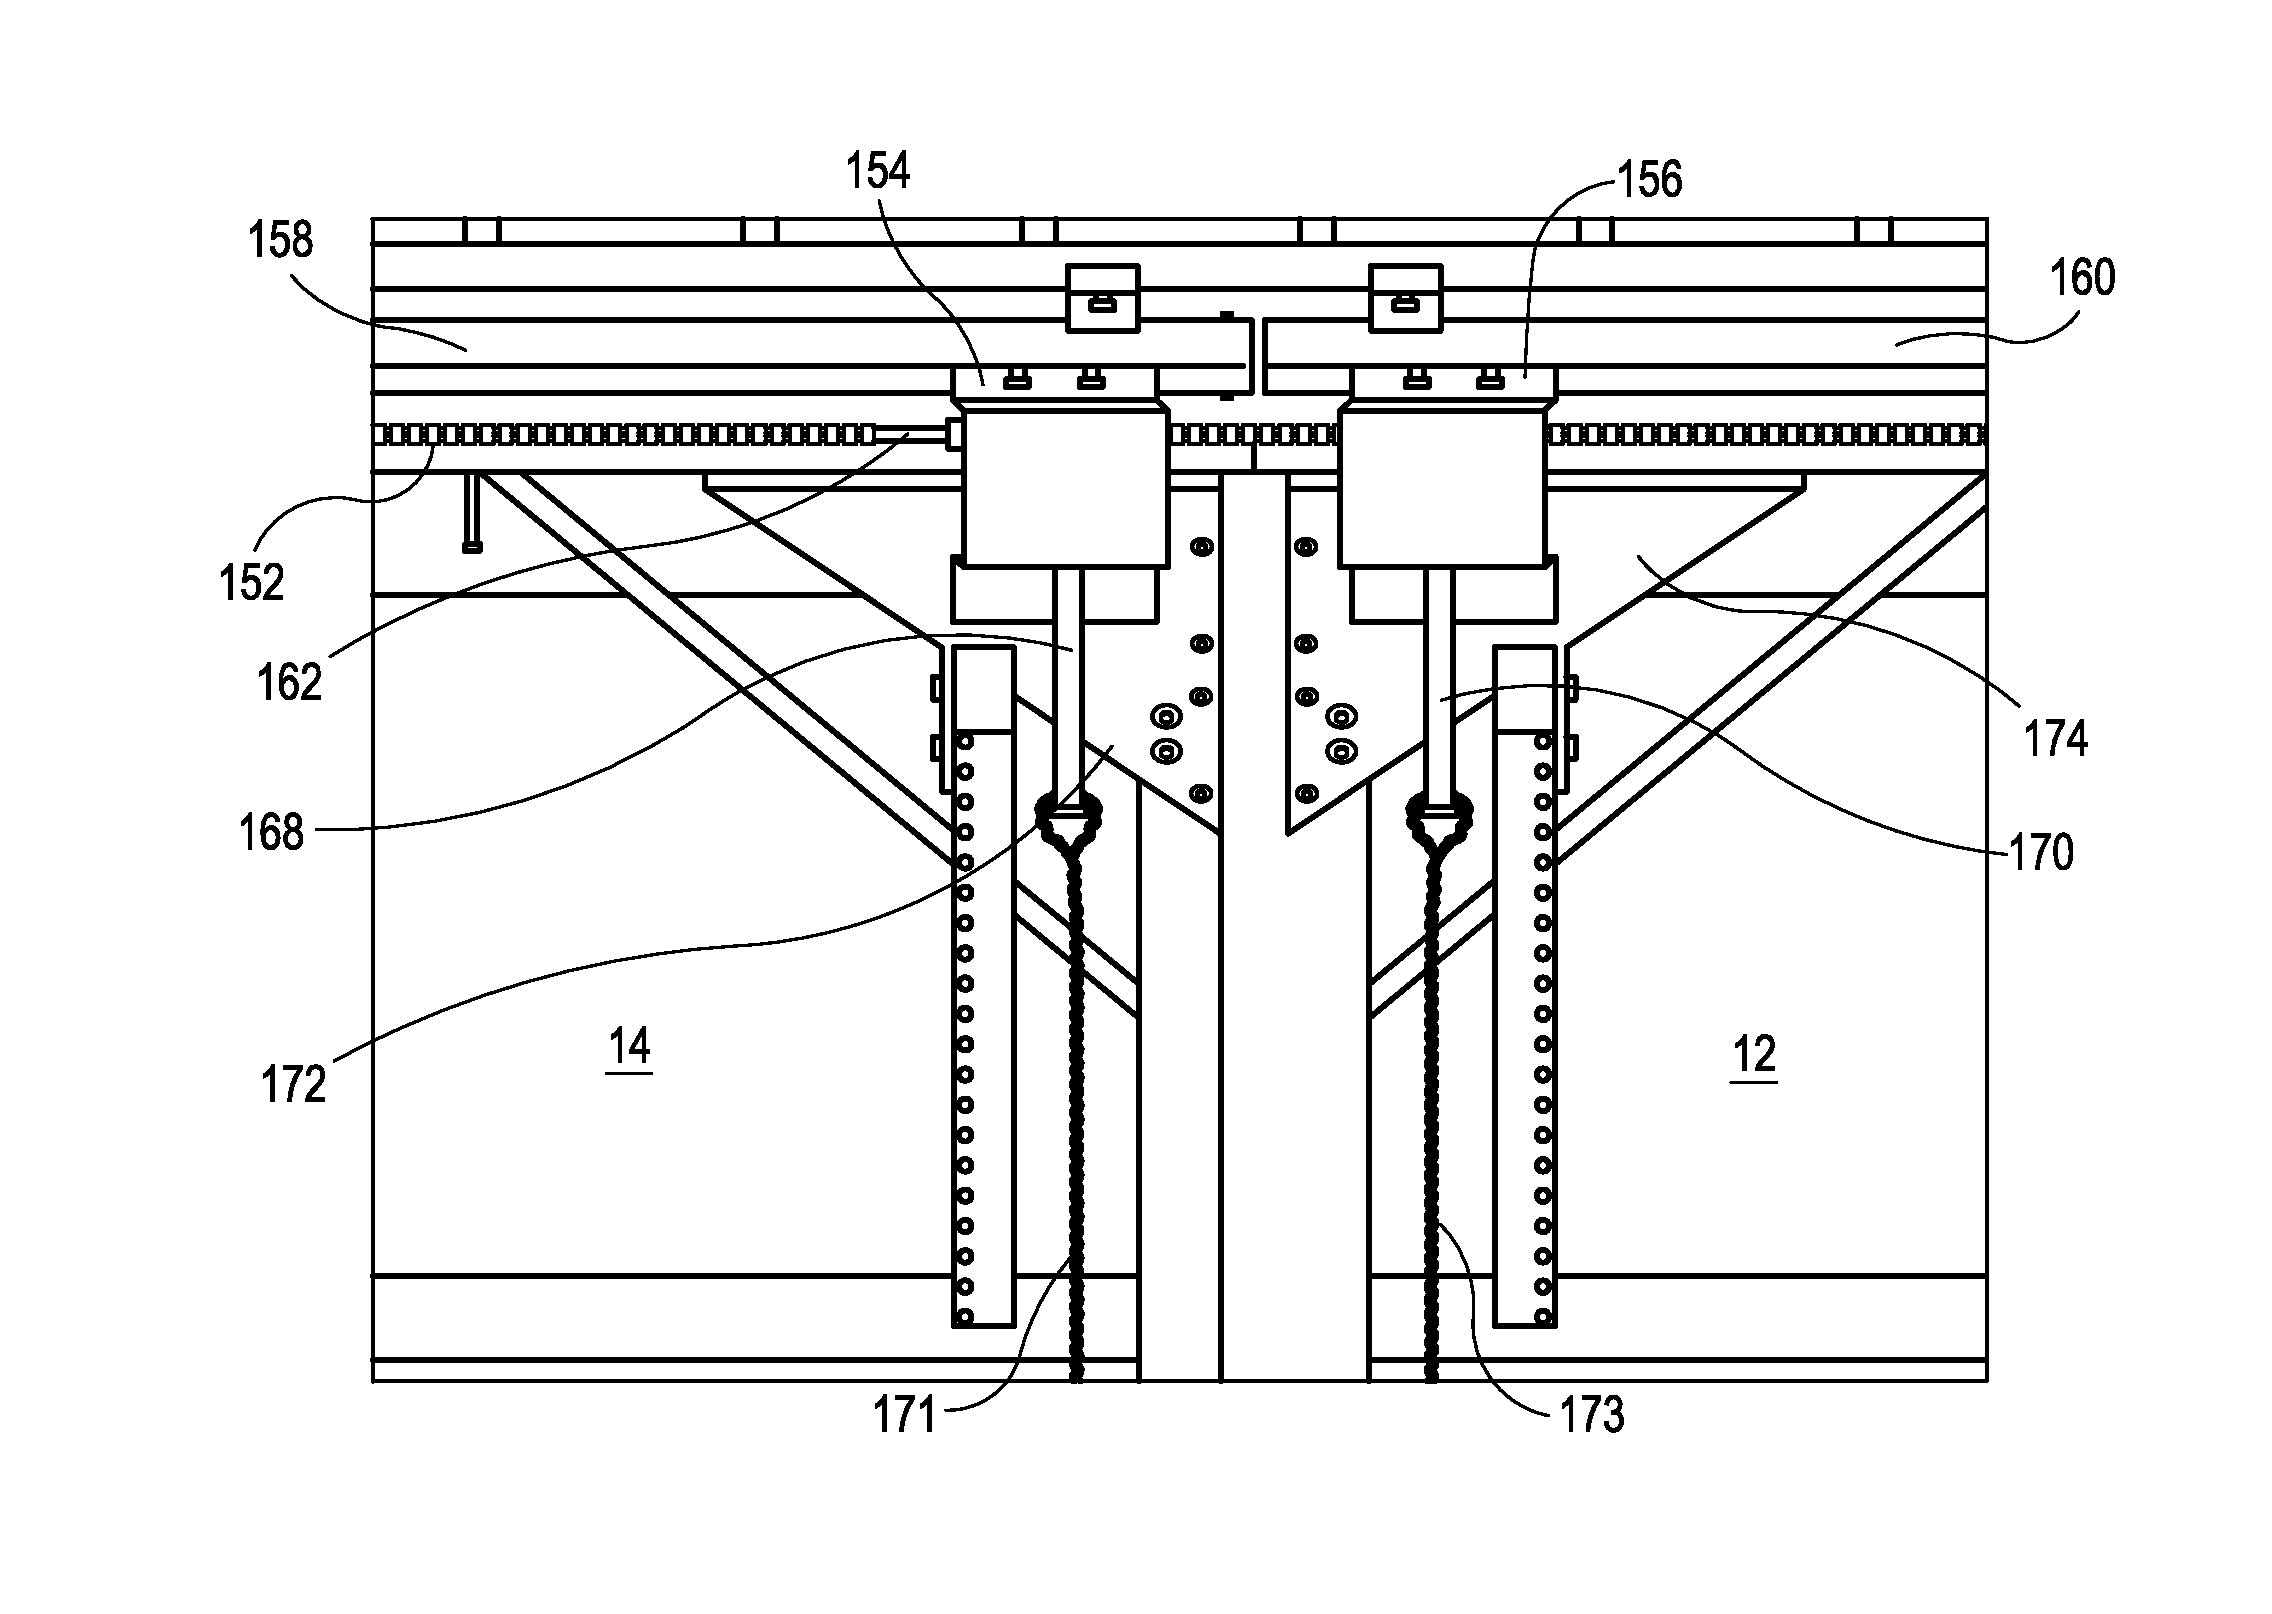 Automatic Sliding Door Systems, Apparatus and Methods